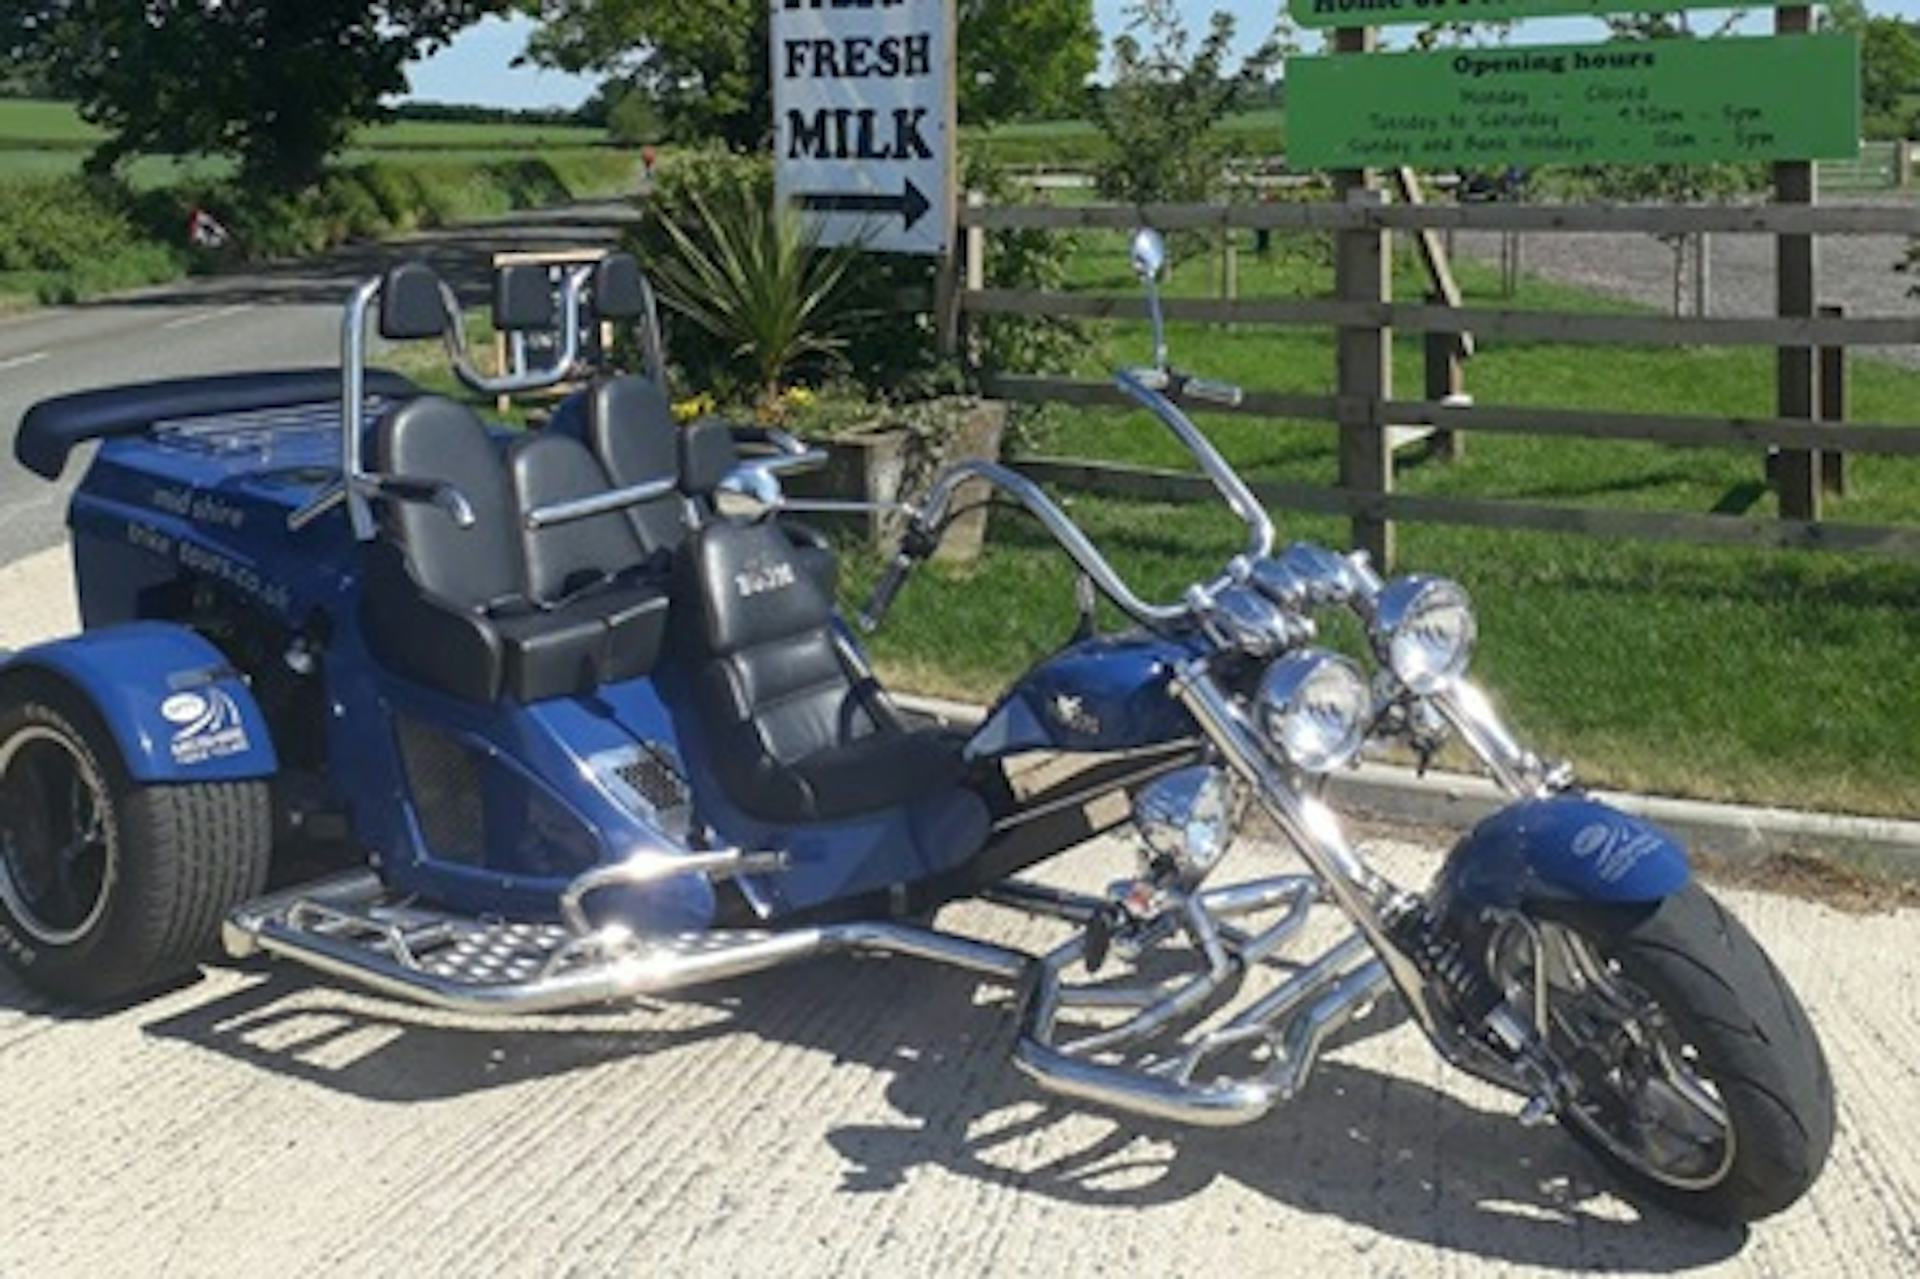 Chauffered Countryside Trike Tour and Lunch for Two